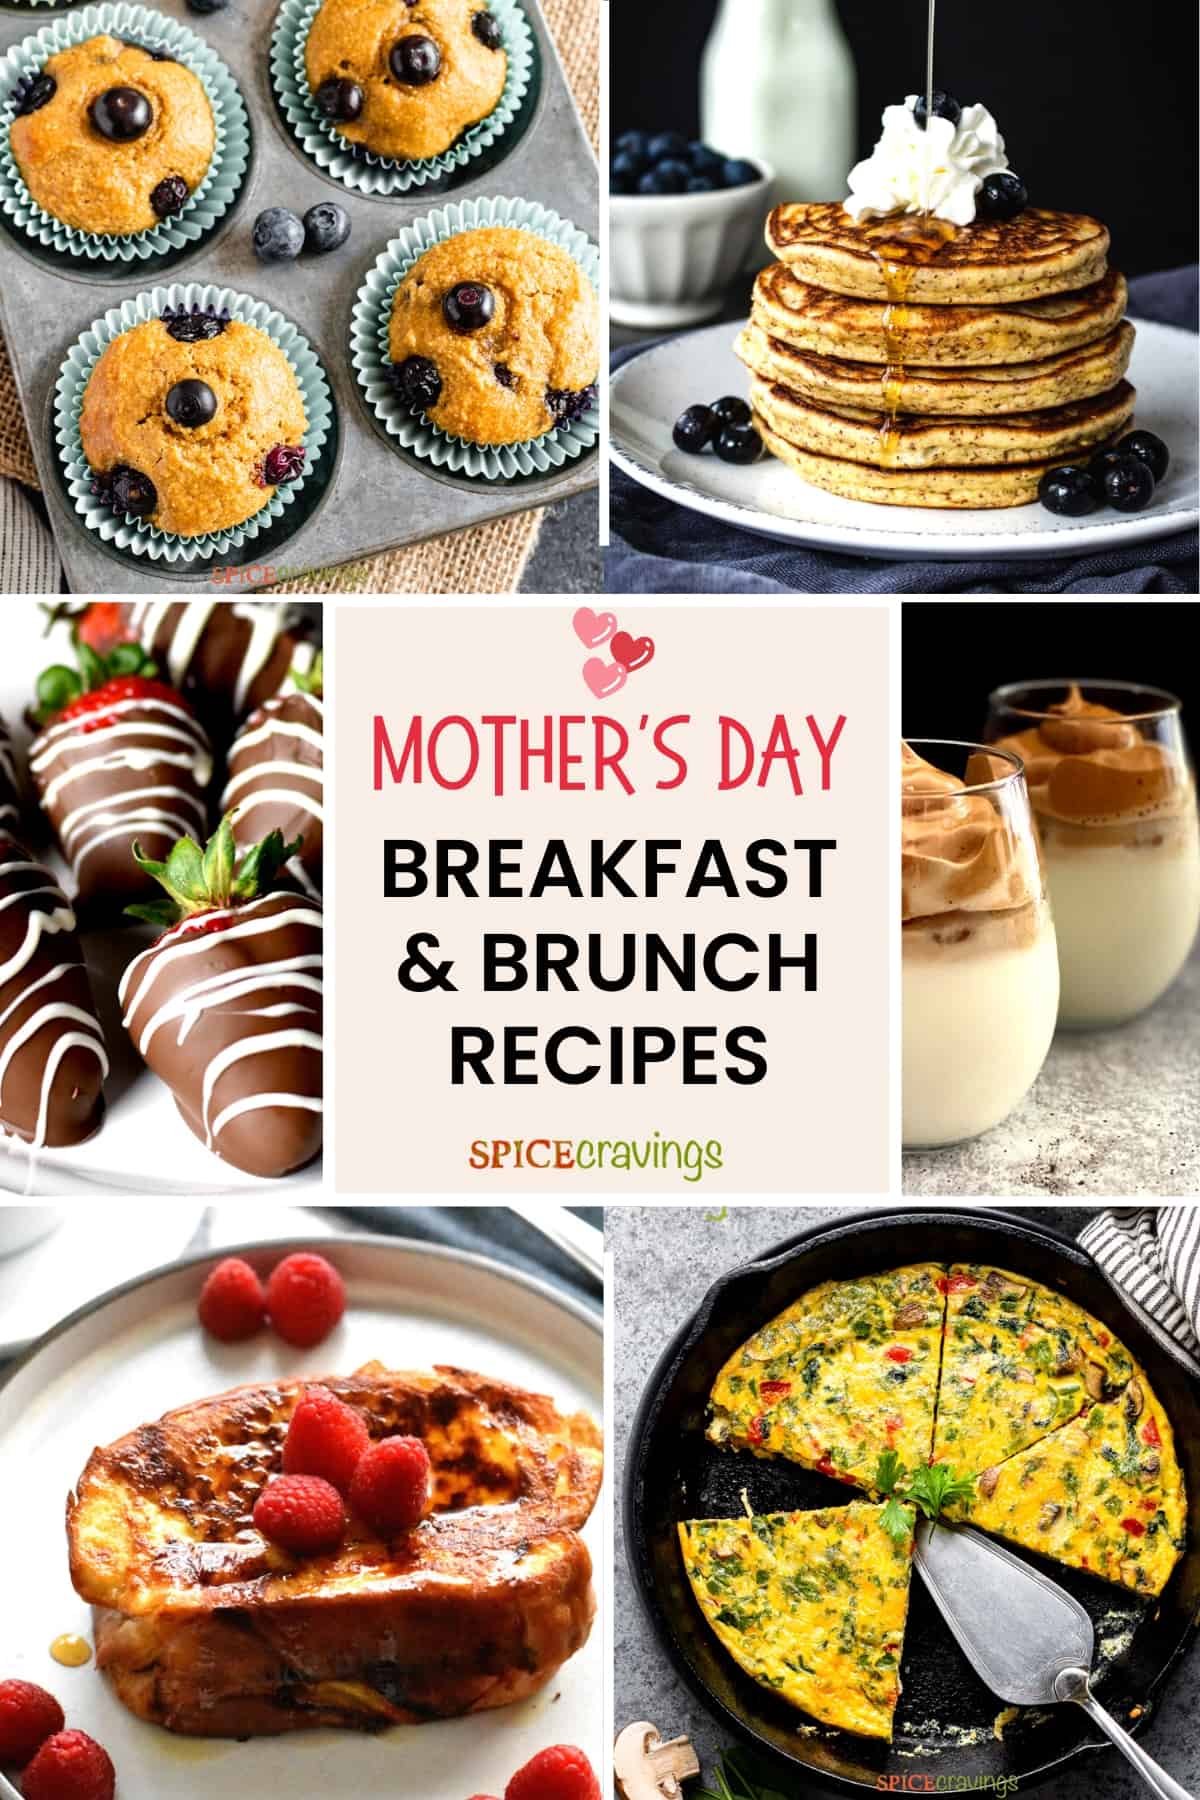 6-recipe collage for Mother's day breakfast including pancakes, muffins and frittata